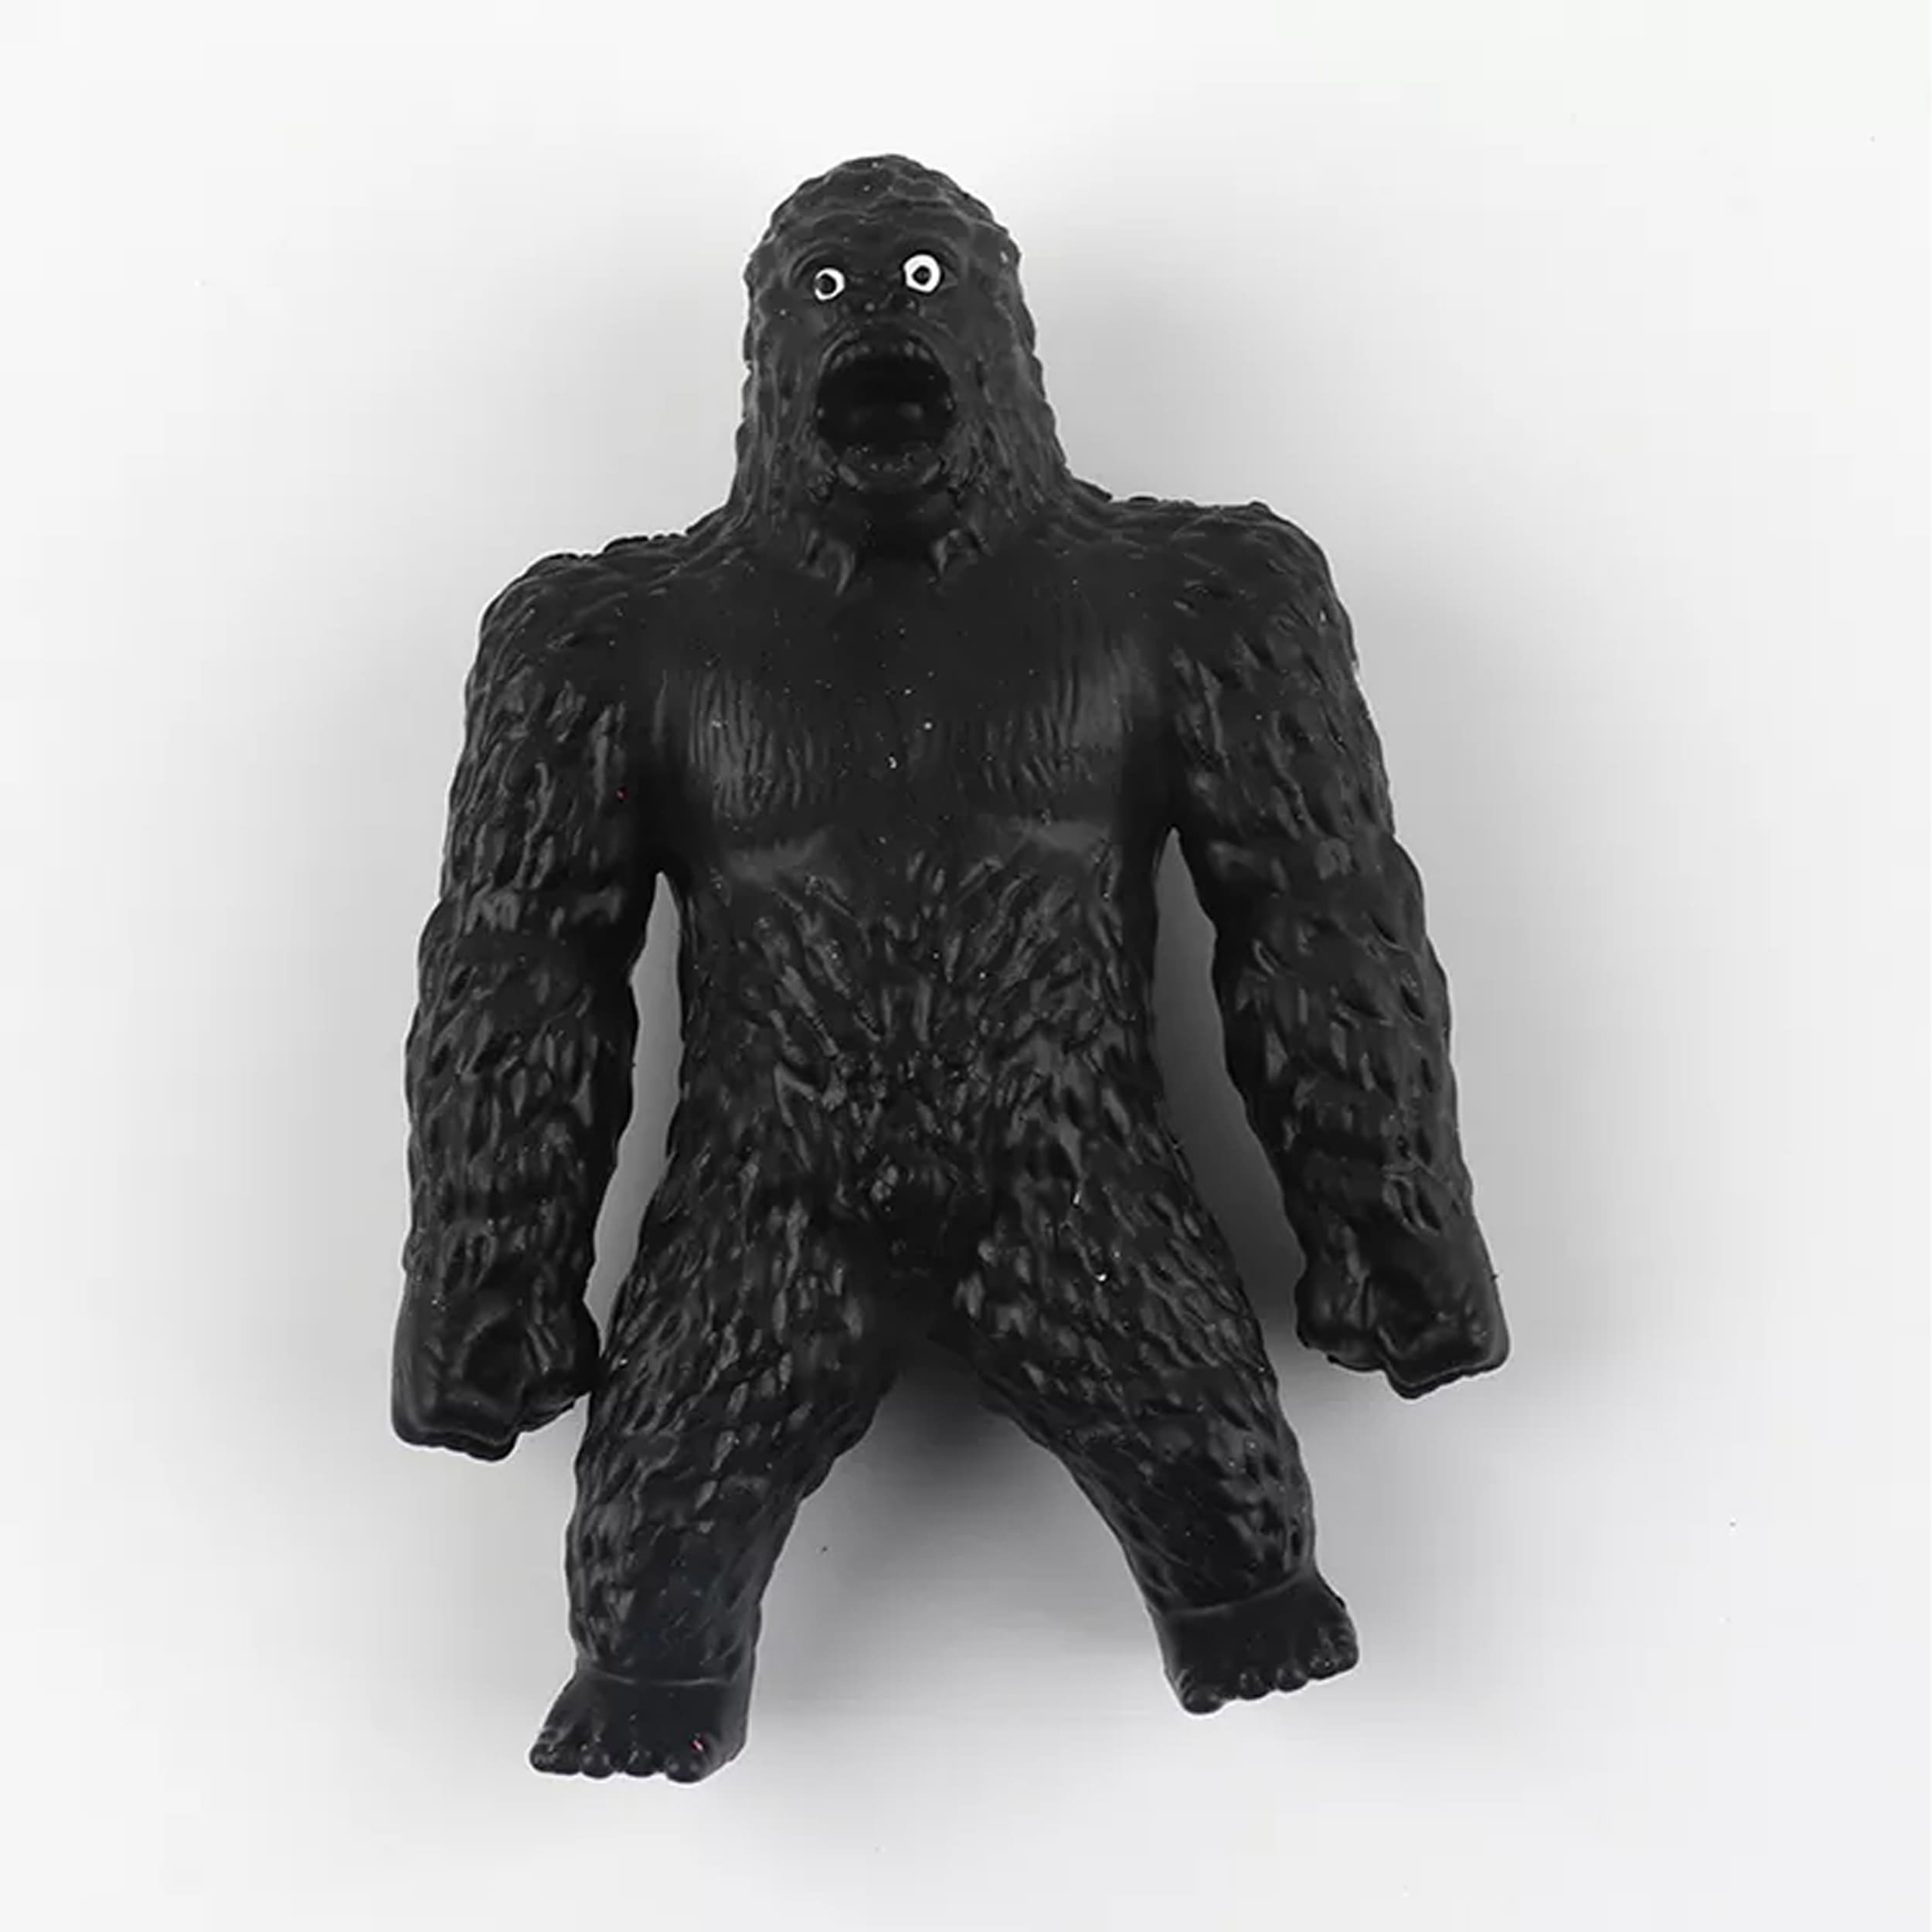 Fun and Squishy Black Gorilla Toy for Kids